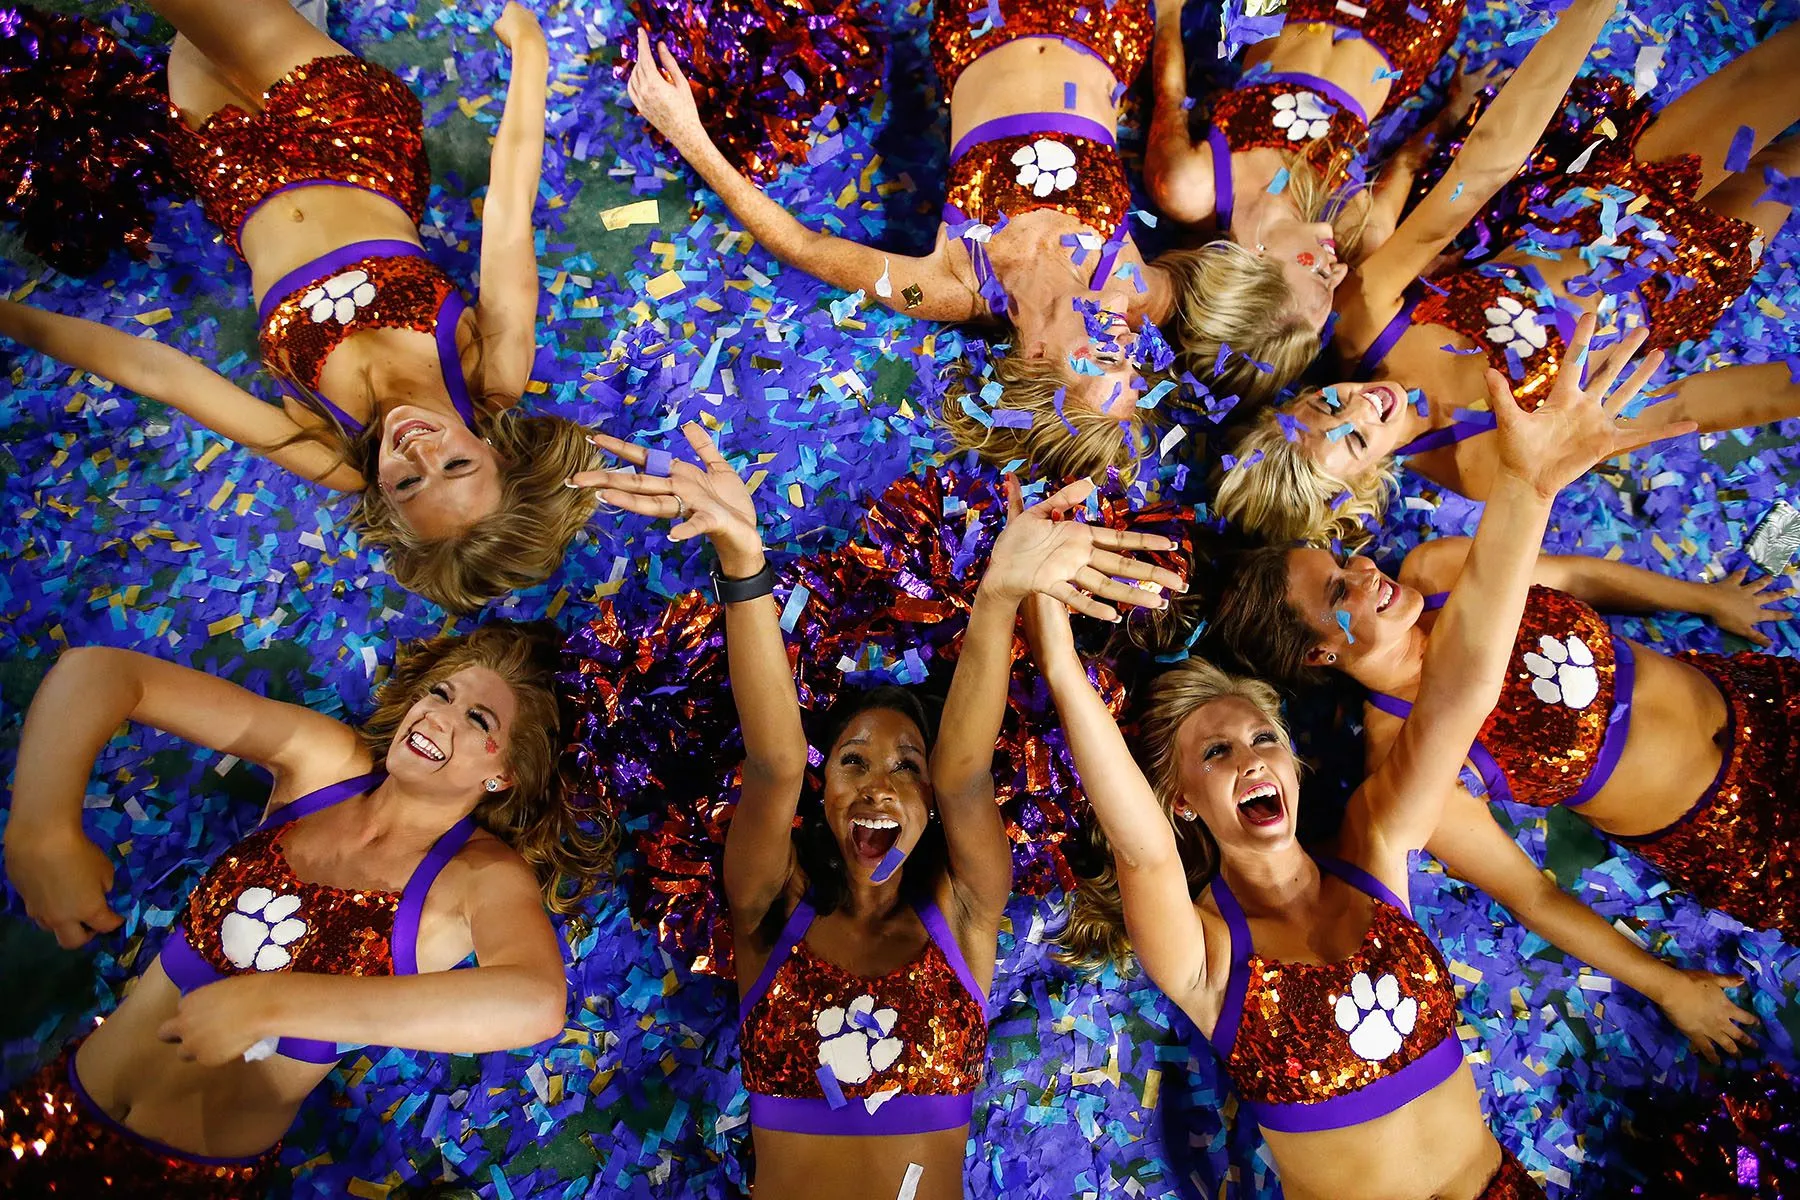 Clemson Tigers cheerleaders play in confetti at the end of a game.